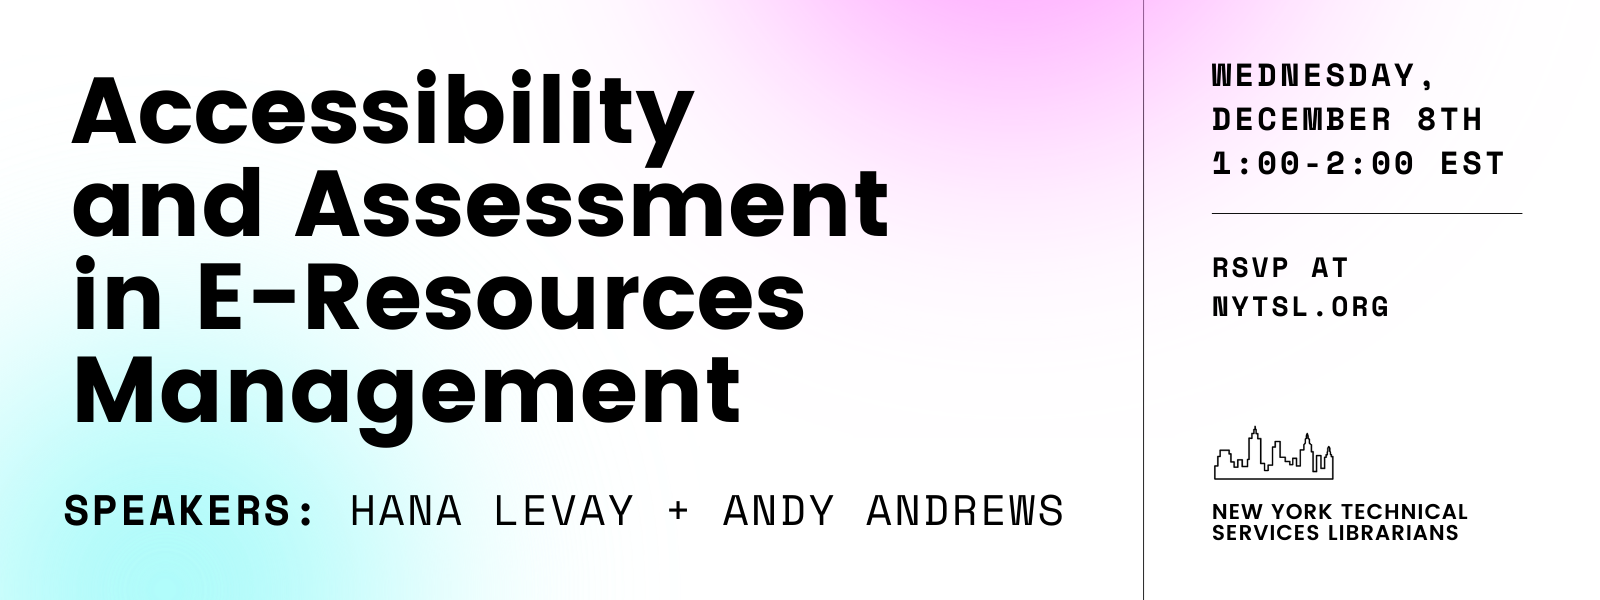 White background with a gradient area of light cyan blue in the bottom left and a gradient area of bright magenta purple in the upper right. Large bold text in black at upper left reads “Accessibility and Assessment in E-Resources Management” followed by monospace text that reads “SPEAKERS: Hana Levay + Andy Andrews. Thin line separating the left two thirds of the image from the right one third of the image. Top right of the image reads “Wednesday, December 8th 1:00-2:00 EST” in bold monospace black text followed by a thin dividing line, followed by “RSVP at NYTSL.ORG” also in bold monospace black text. Bottom right graphic of black outline of New York City skyline followed by dark grey text that reads “New York Technical Services Librarians”.